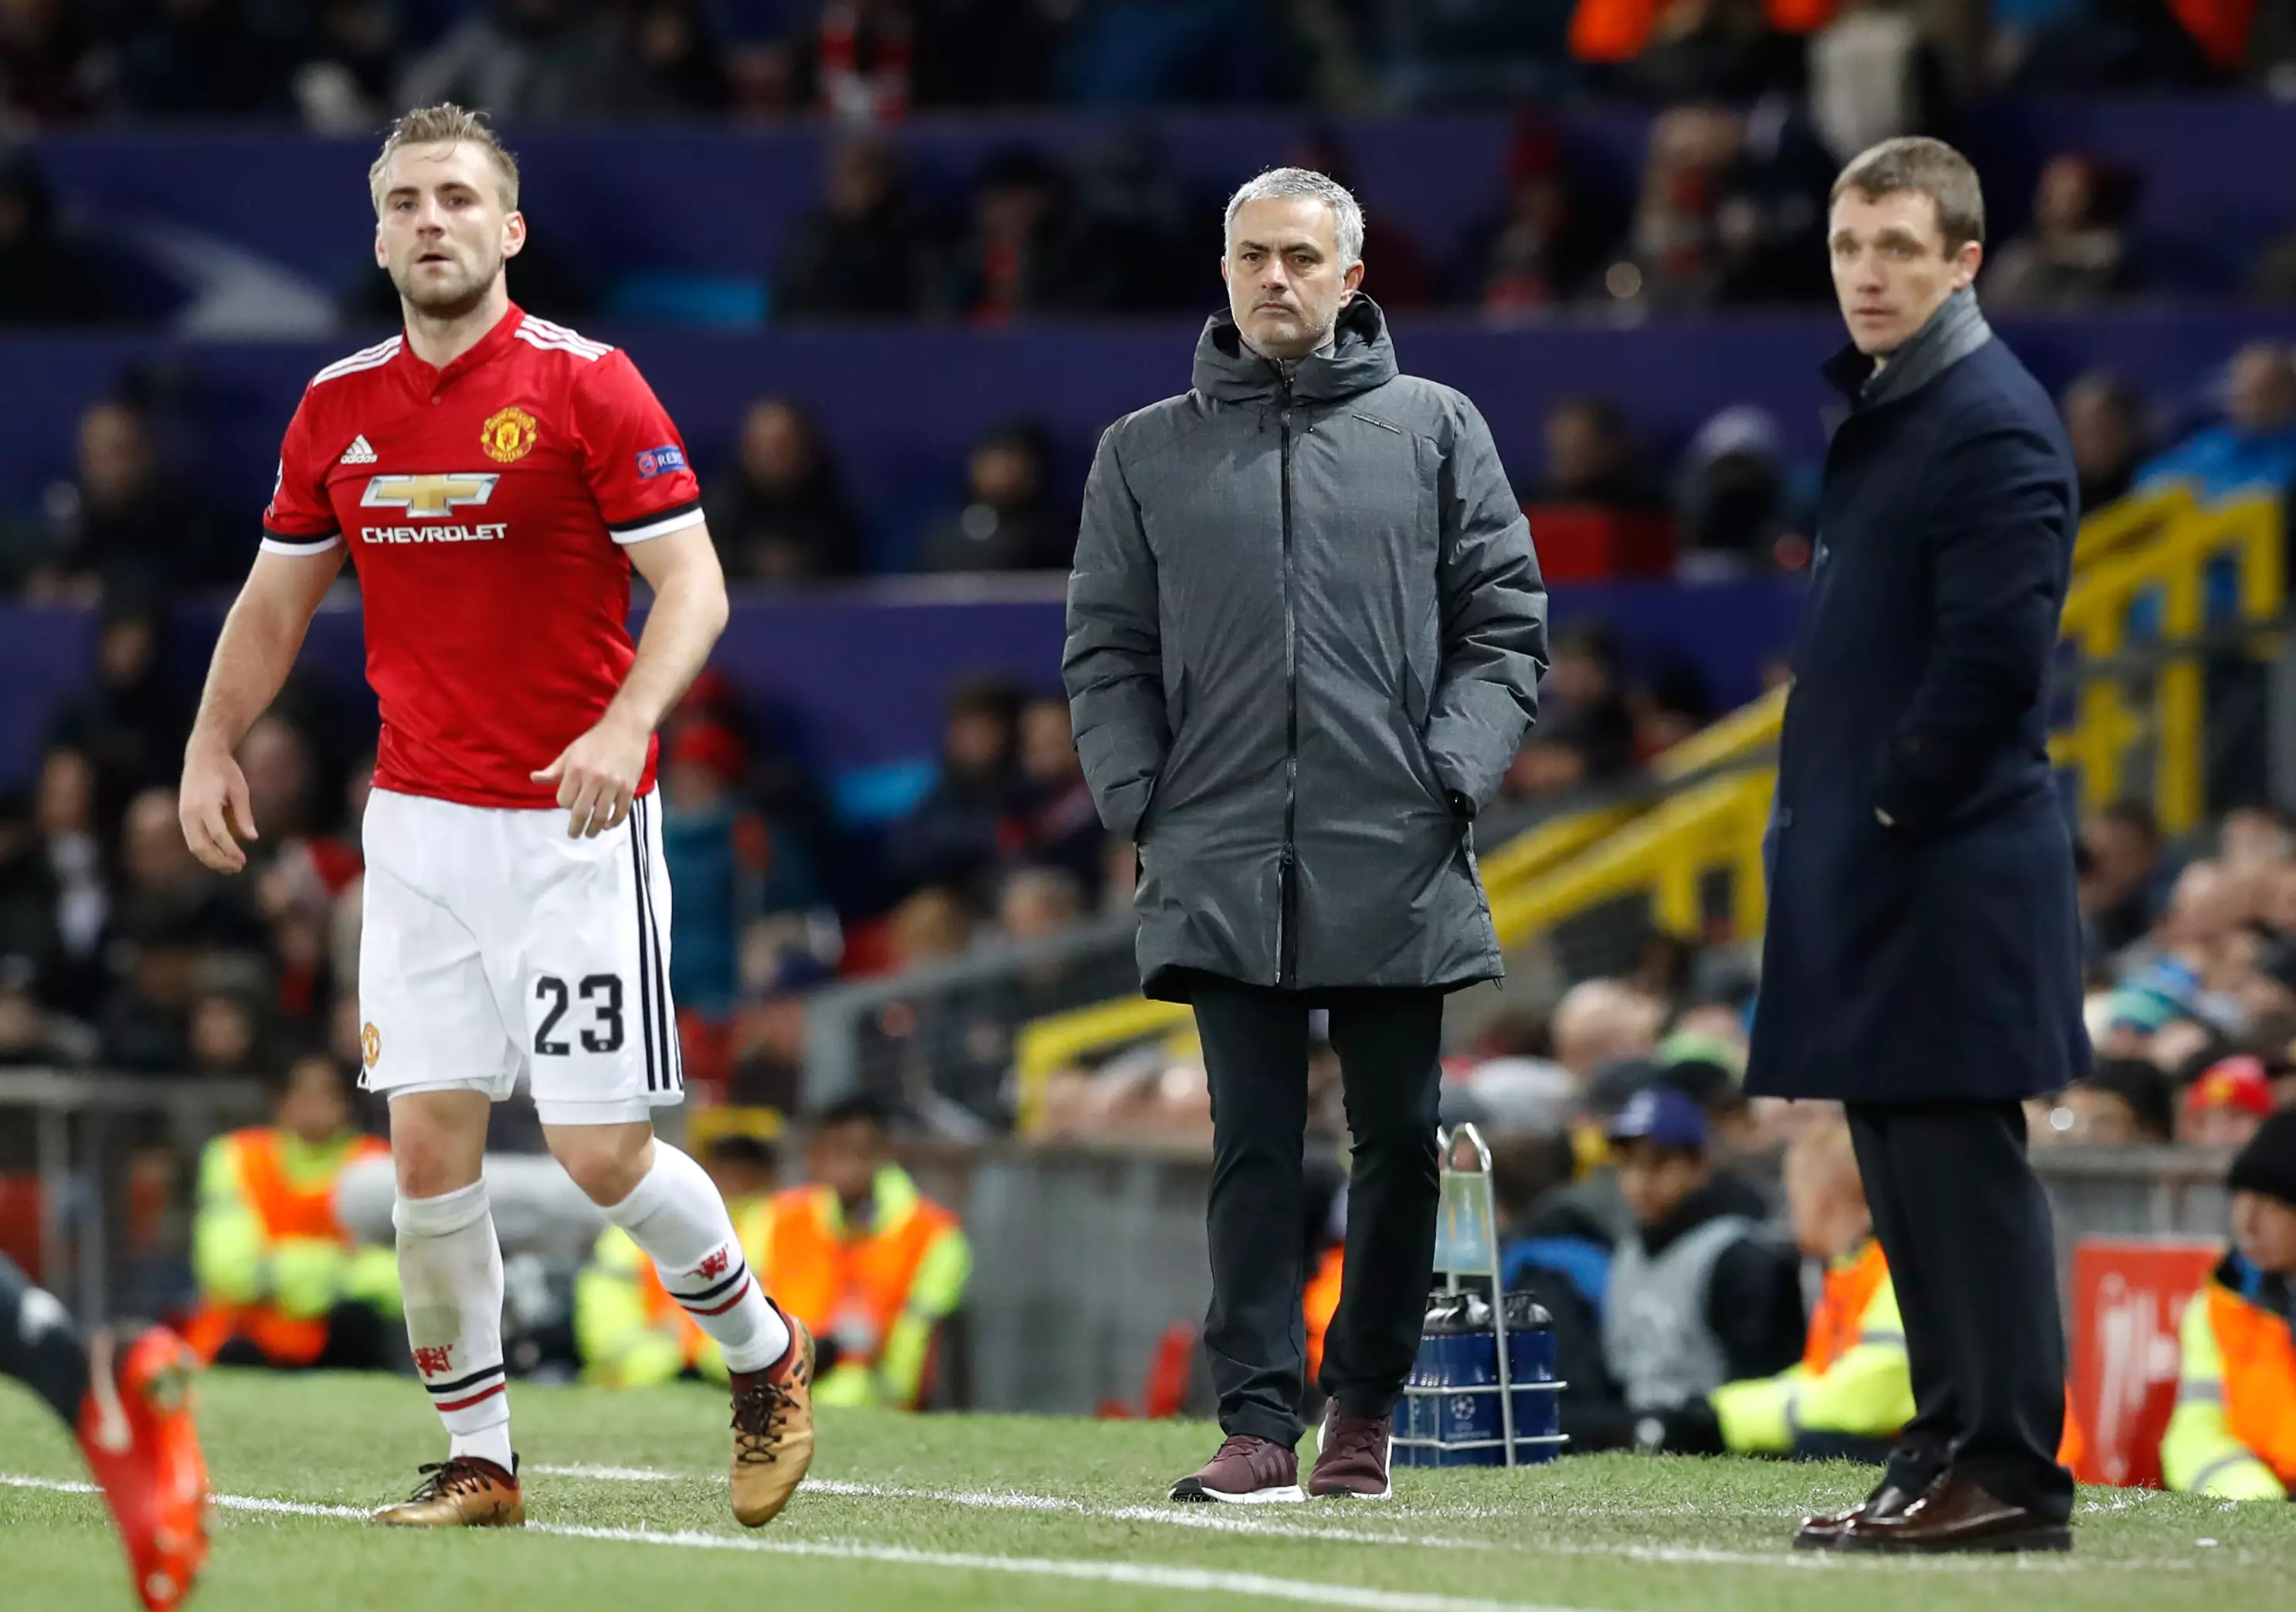 Mourinho looks on, deciding whether to praise Shaw or bully him. Image: PA Images